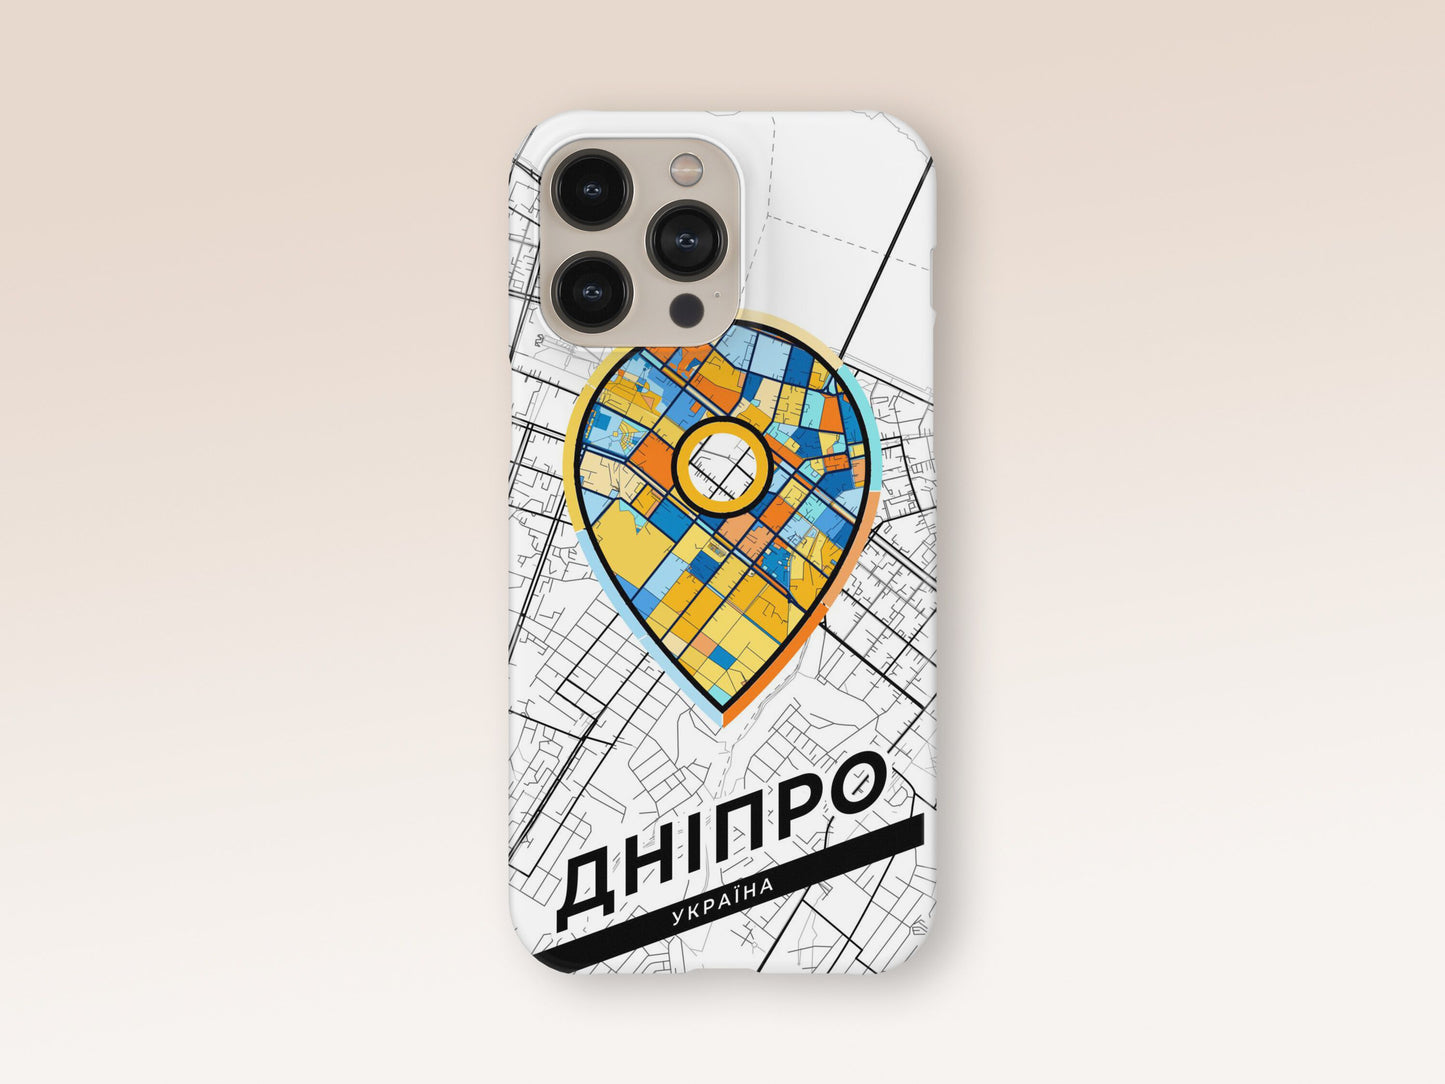 Dnipro Ukraine slim phone case with colorful icon. Birthday, wedding or housewarming gift. Couple match cases. 1